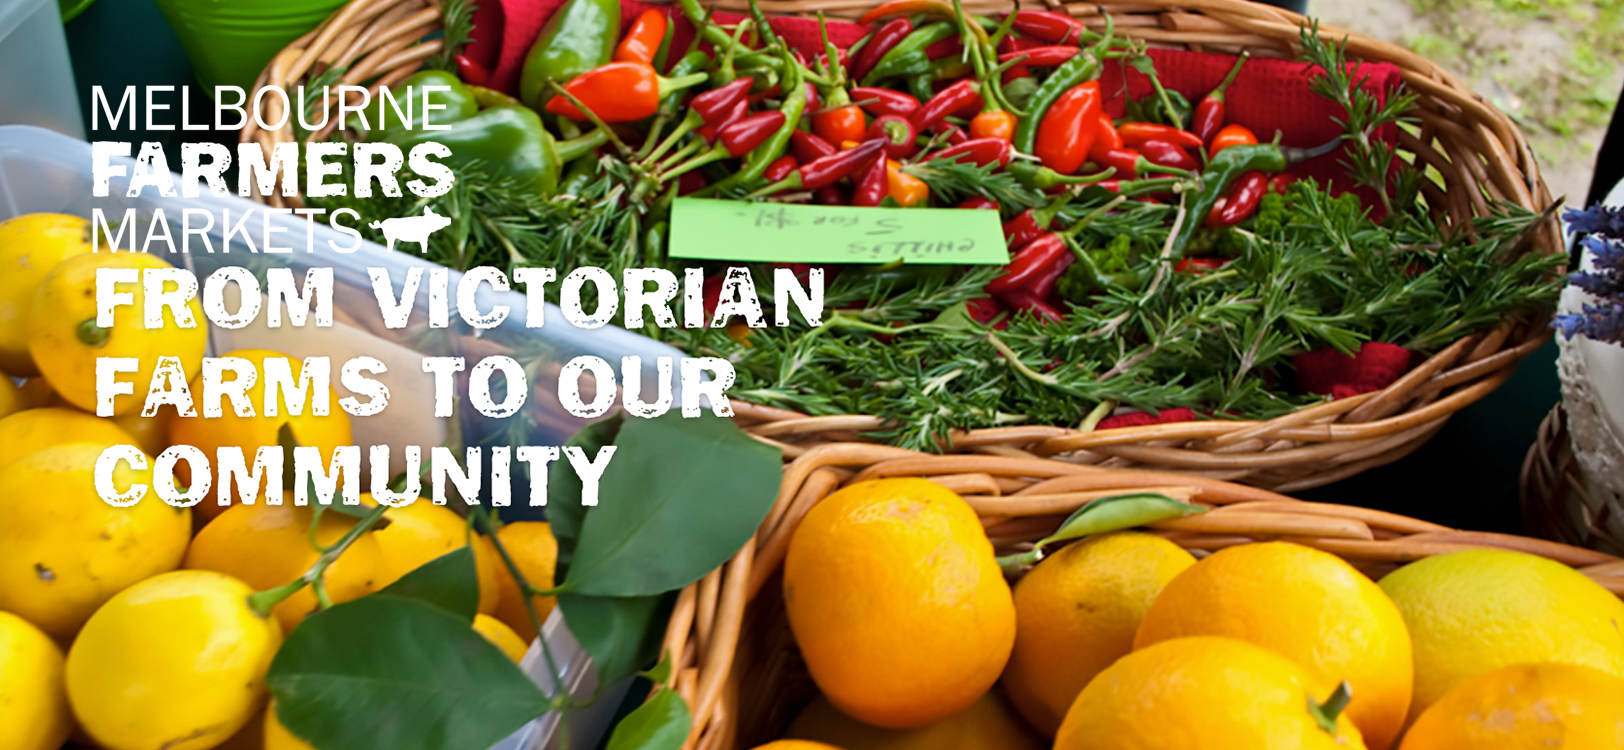 Melbourne Farmers Markets is a not for profit social enterprise dedicated to Victorian food and producers, regional food cultures, seasonal produce, biodiversity, sustainable farming practices and strengthening relationships between the consumer and the producer.